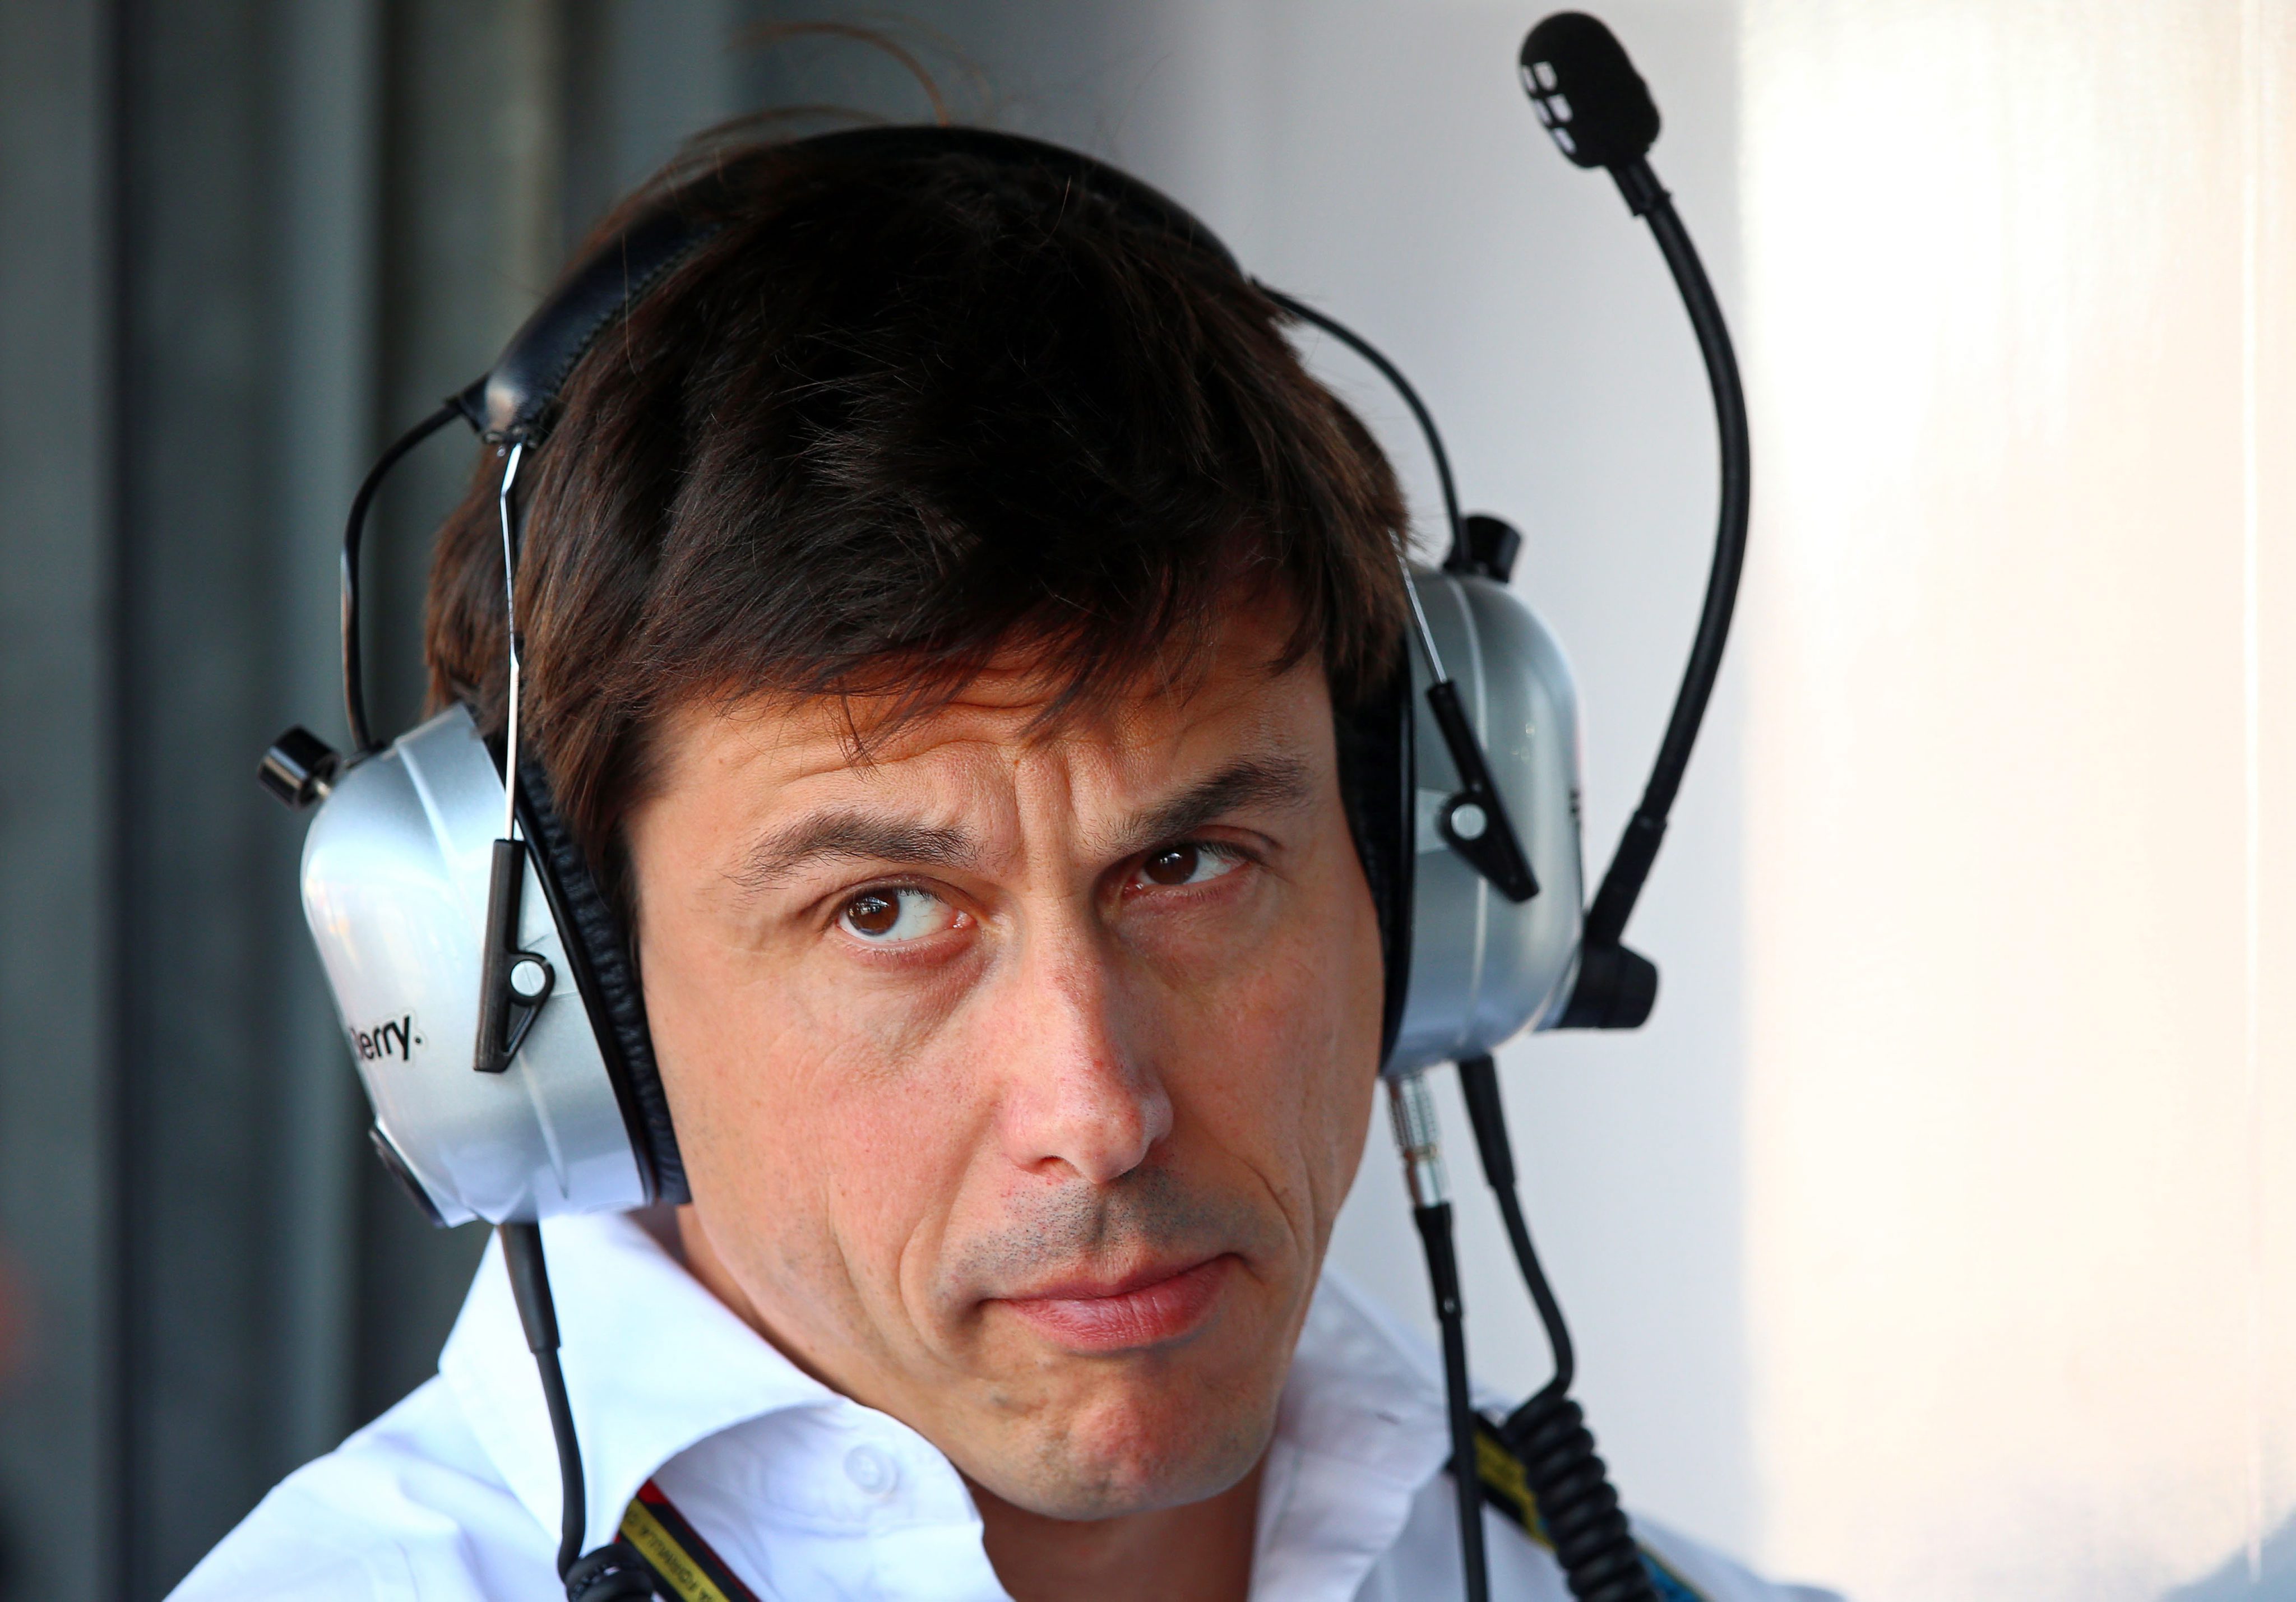 Mercedes boss Toto Wolff is trying to keep his drivers calm before the season finale in Abu Dhabi. Photo: EPA